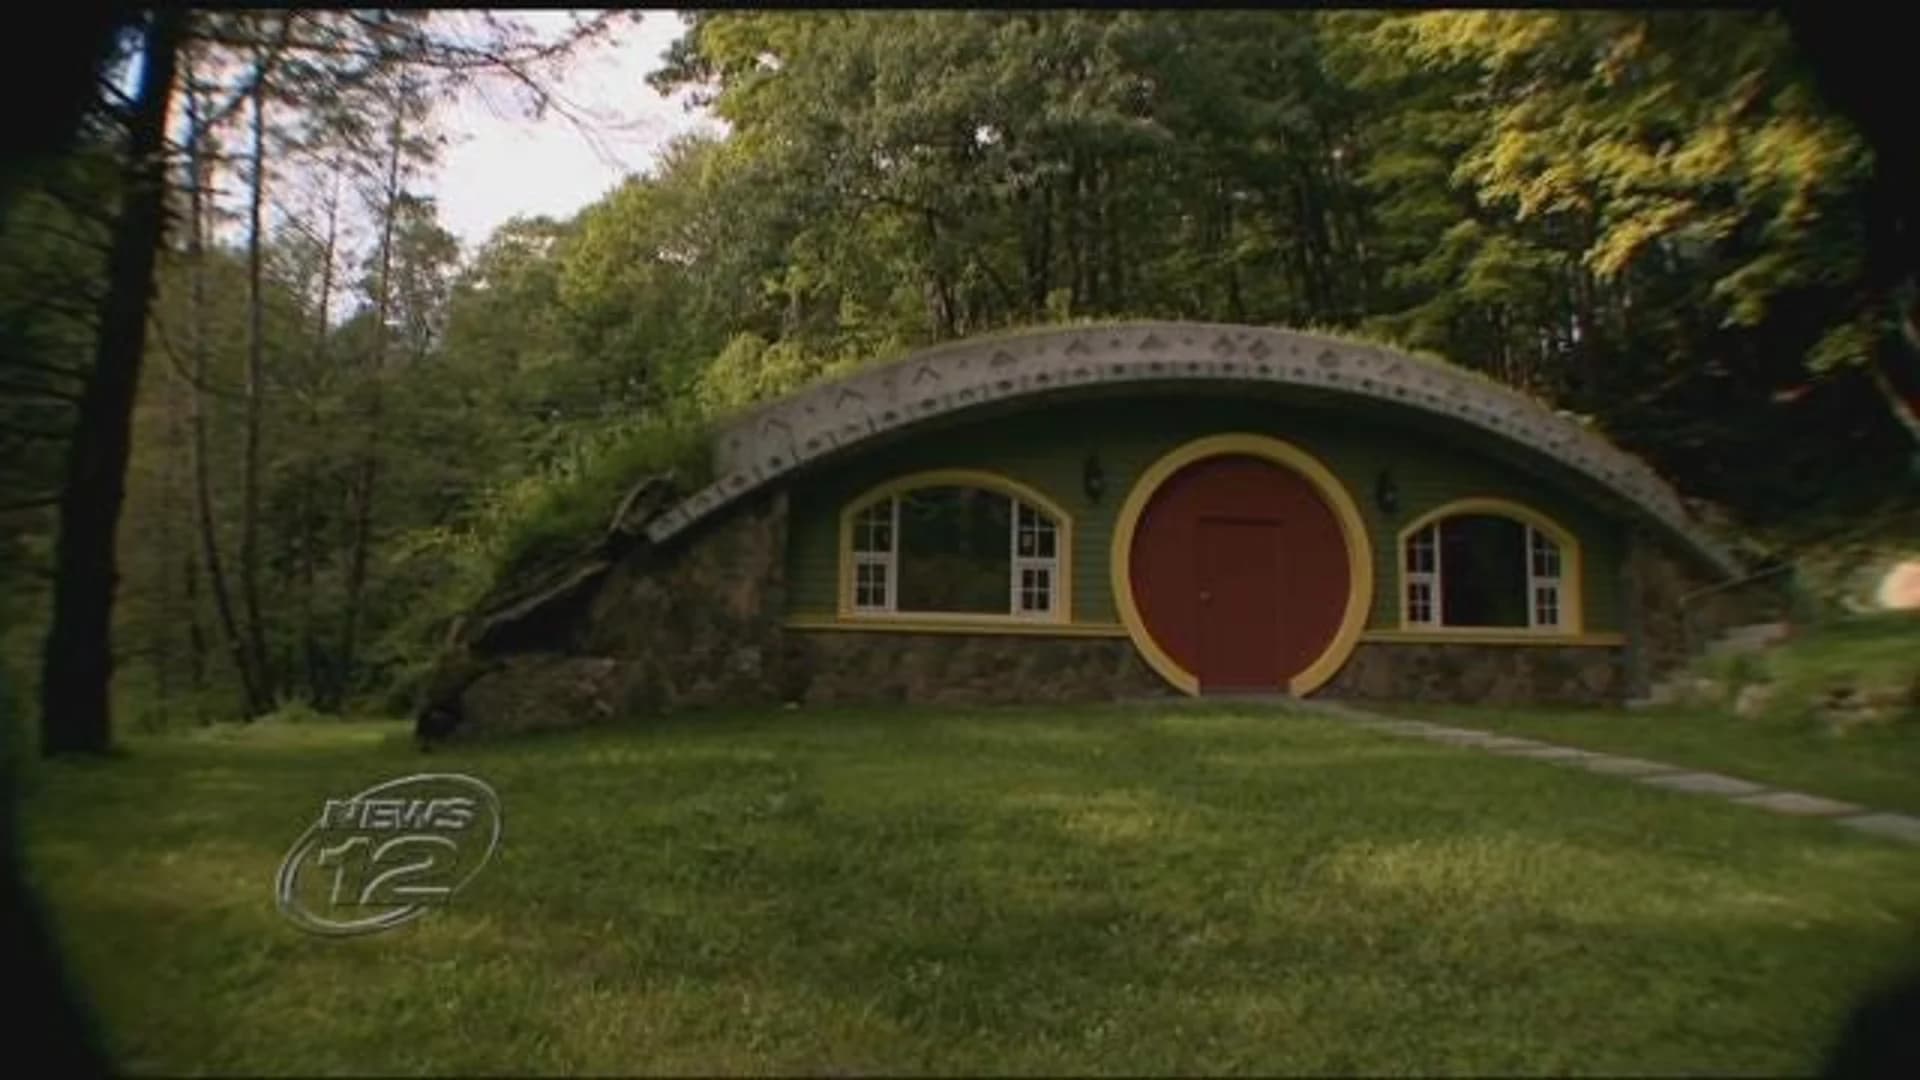 ‘Lord of the Rings’ superfan builds Hobbit-like house